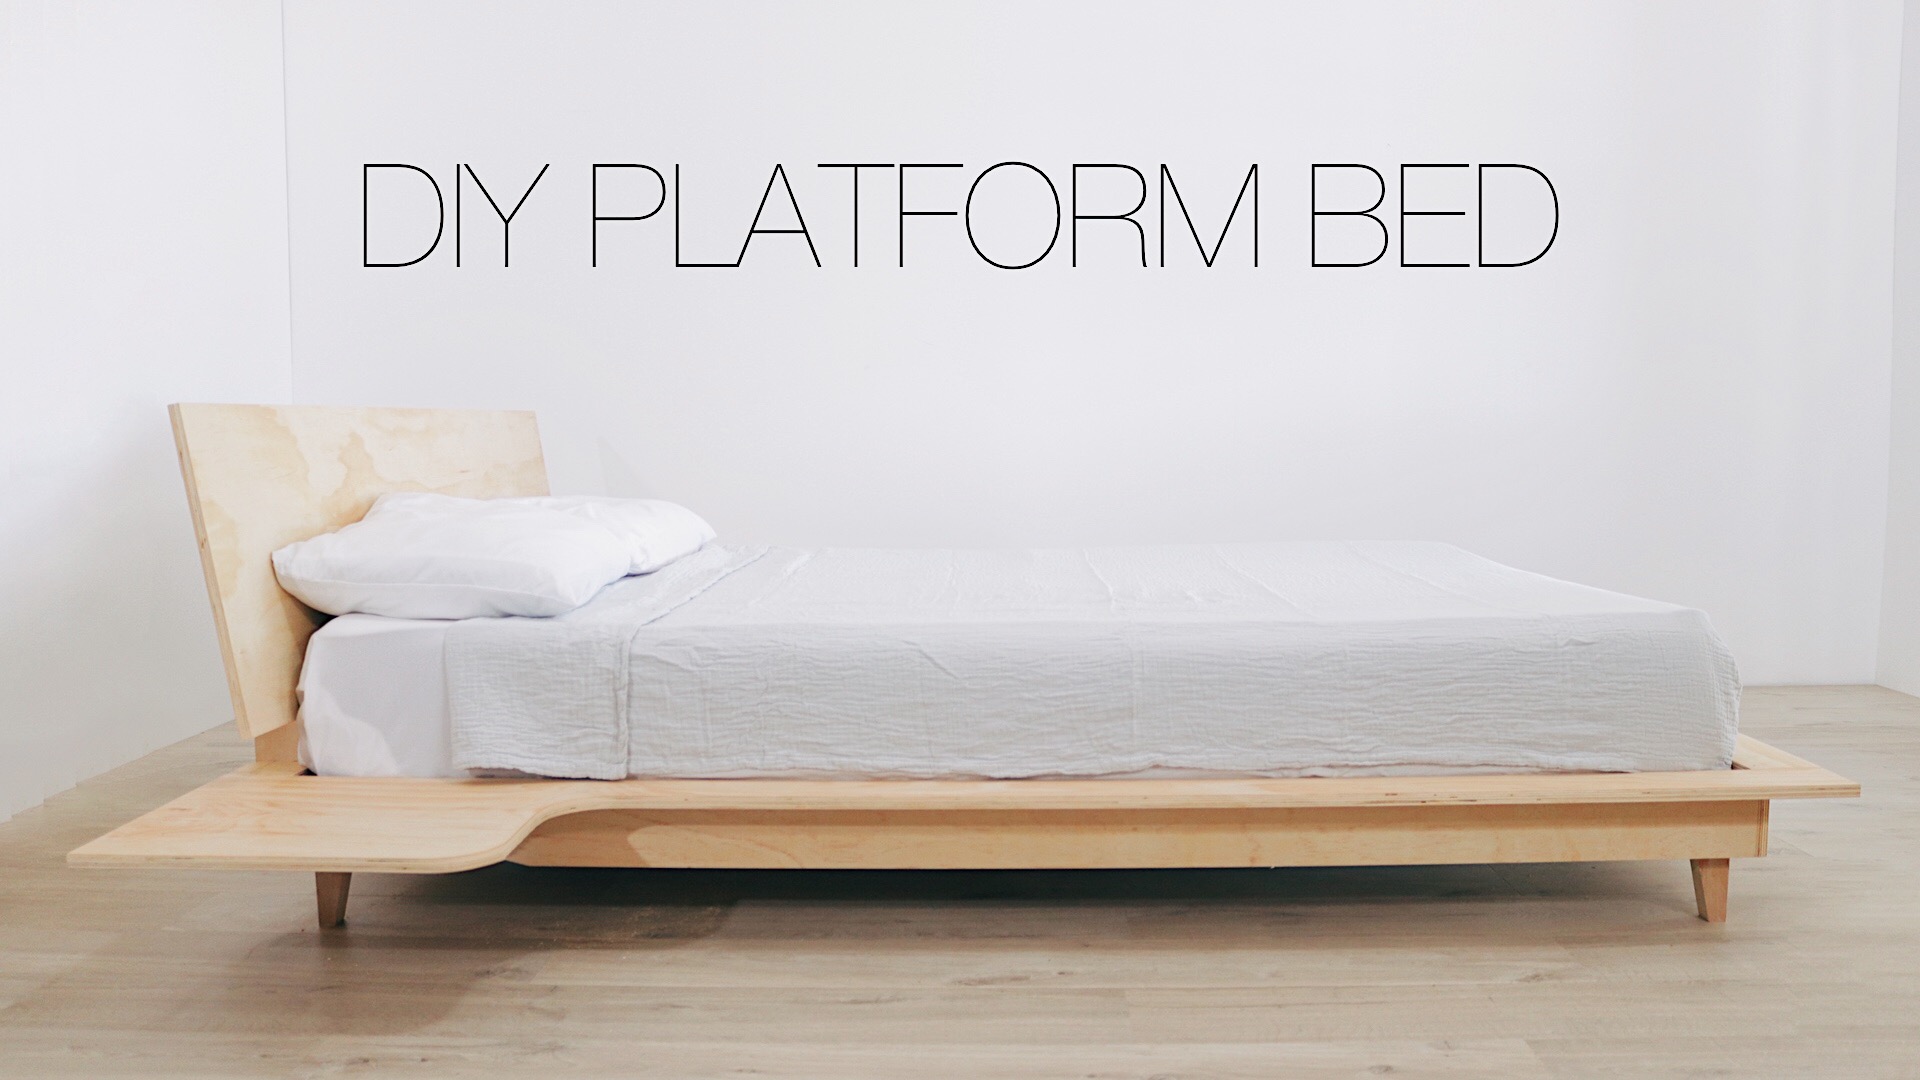  How to Build a Modern, Platform Bed with Integrated Nightstands by: Mike Montgomery | Modern Builds 